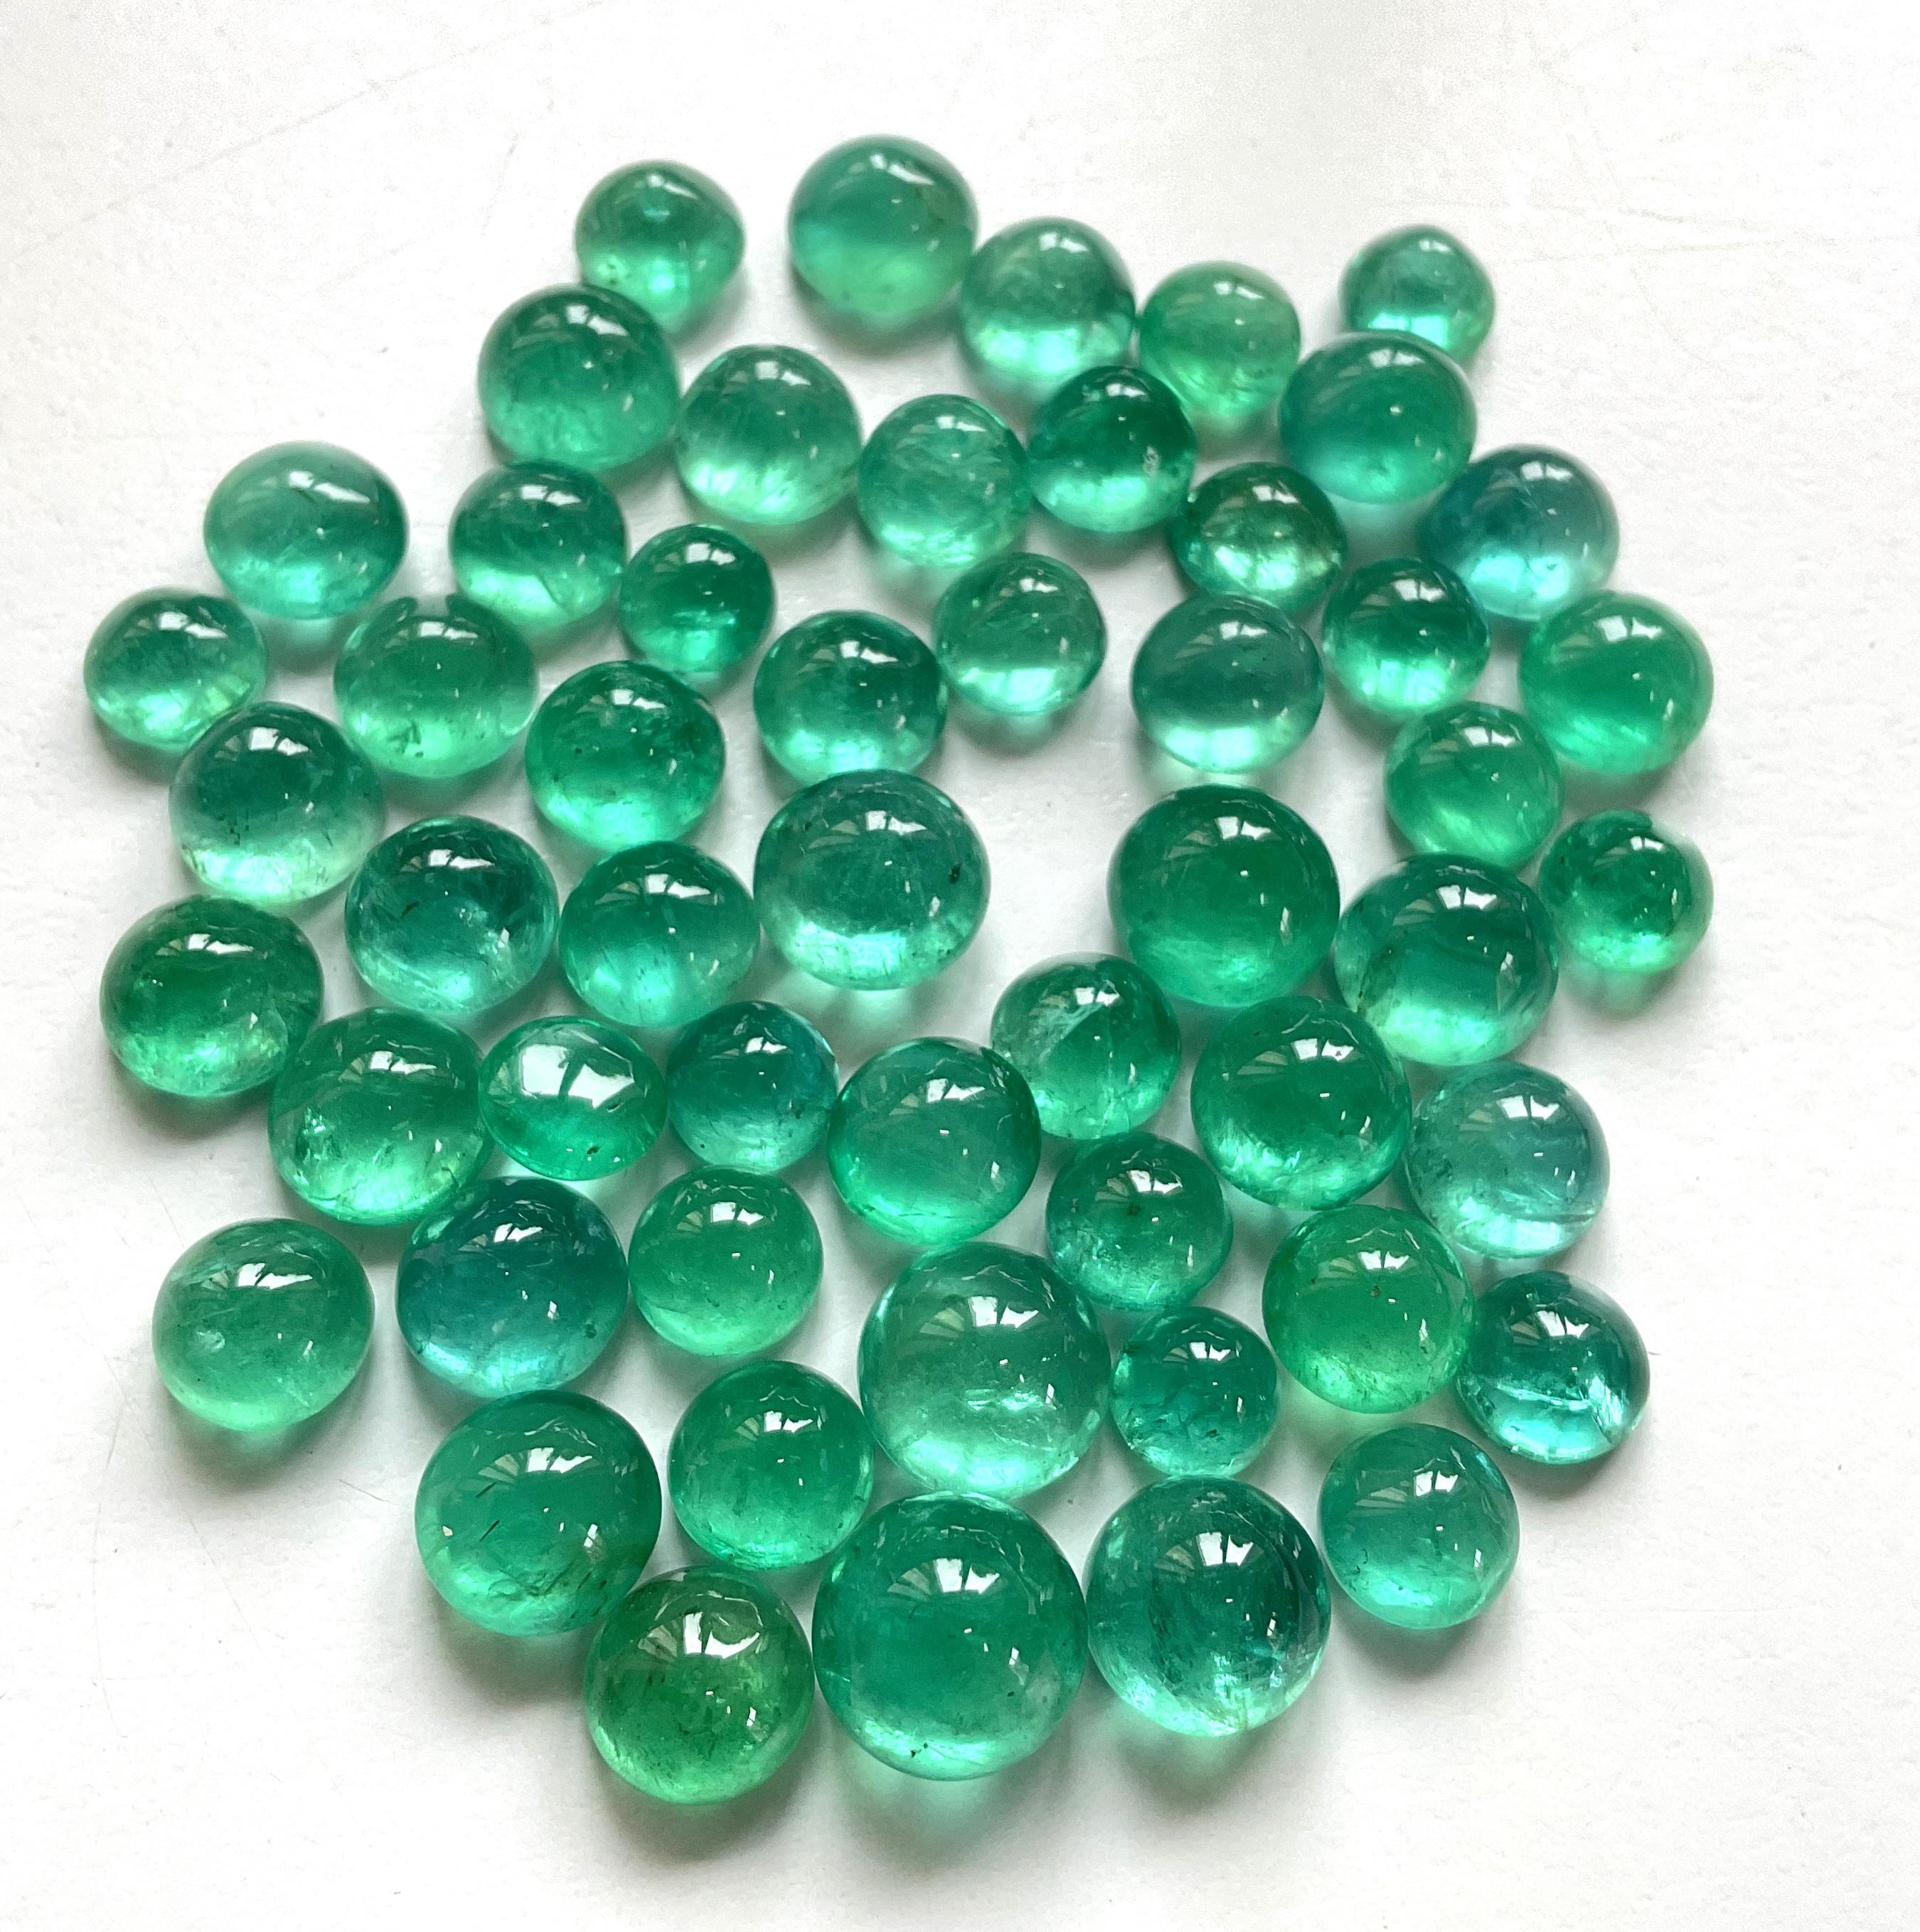 111.00 carats Zambian Emerald Round Plain Cabs Top Quality For Jewelry Gemstone  en vente 2